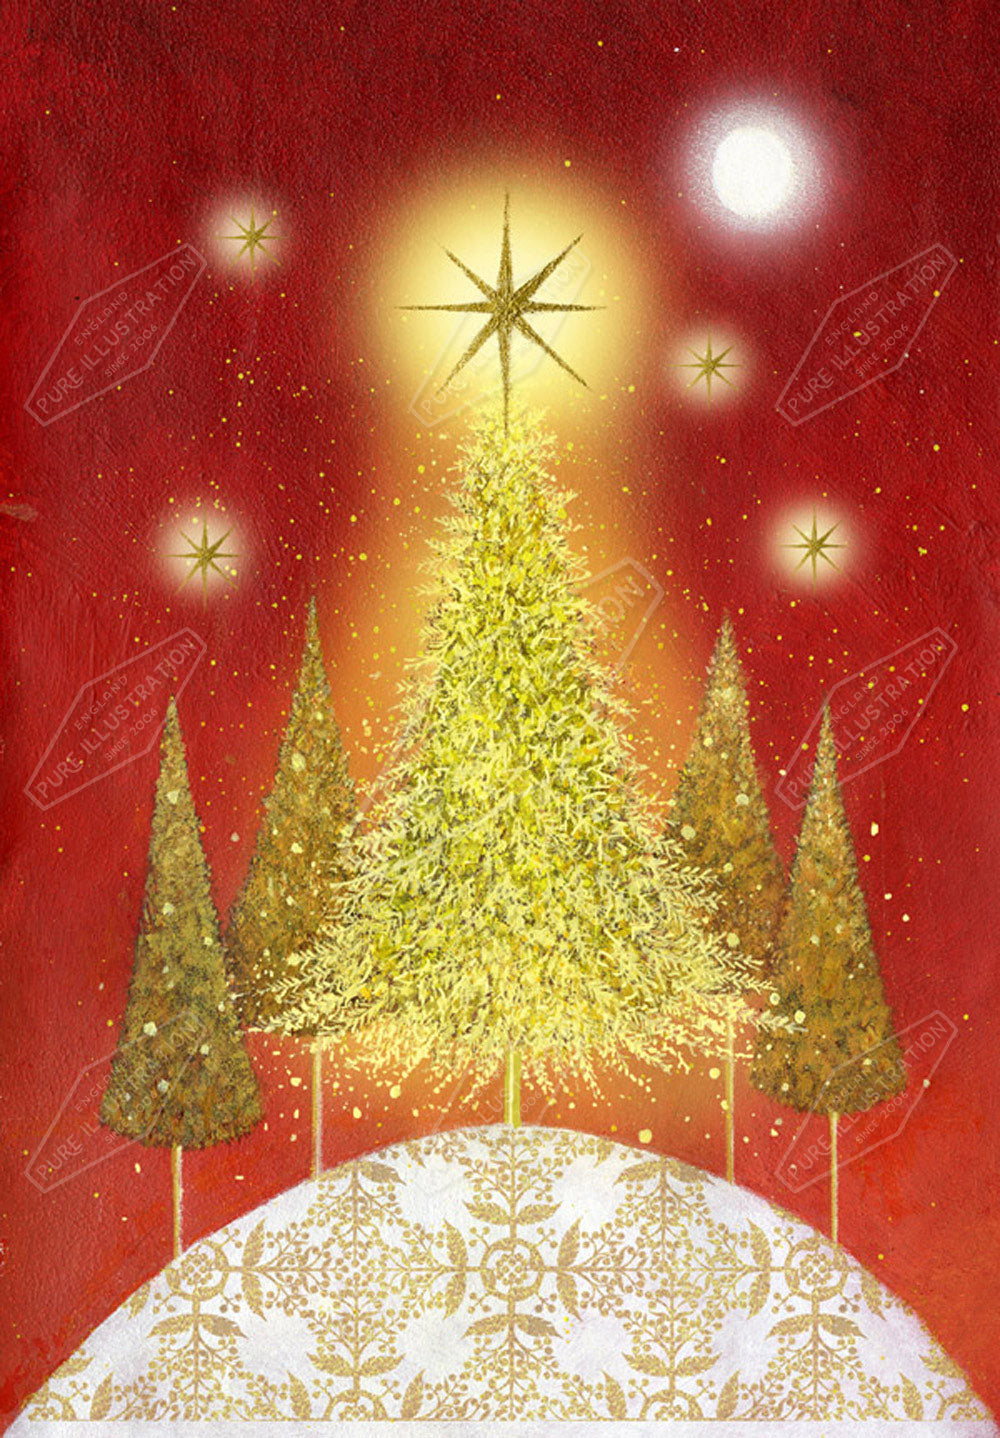 00015942JPA- Jan Pashley is represented by Pure Art Licensing Agency - Christmas Greeting Card Design